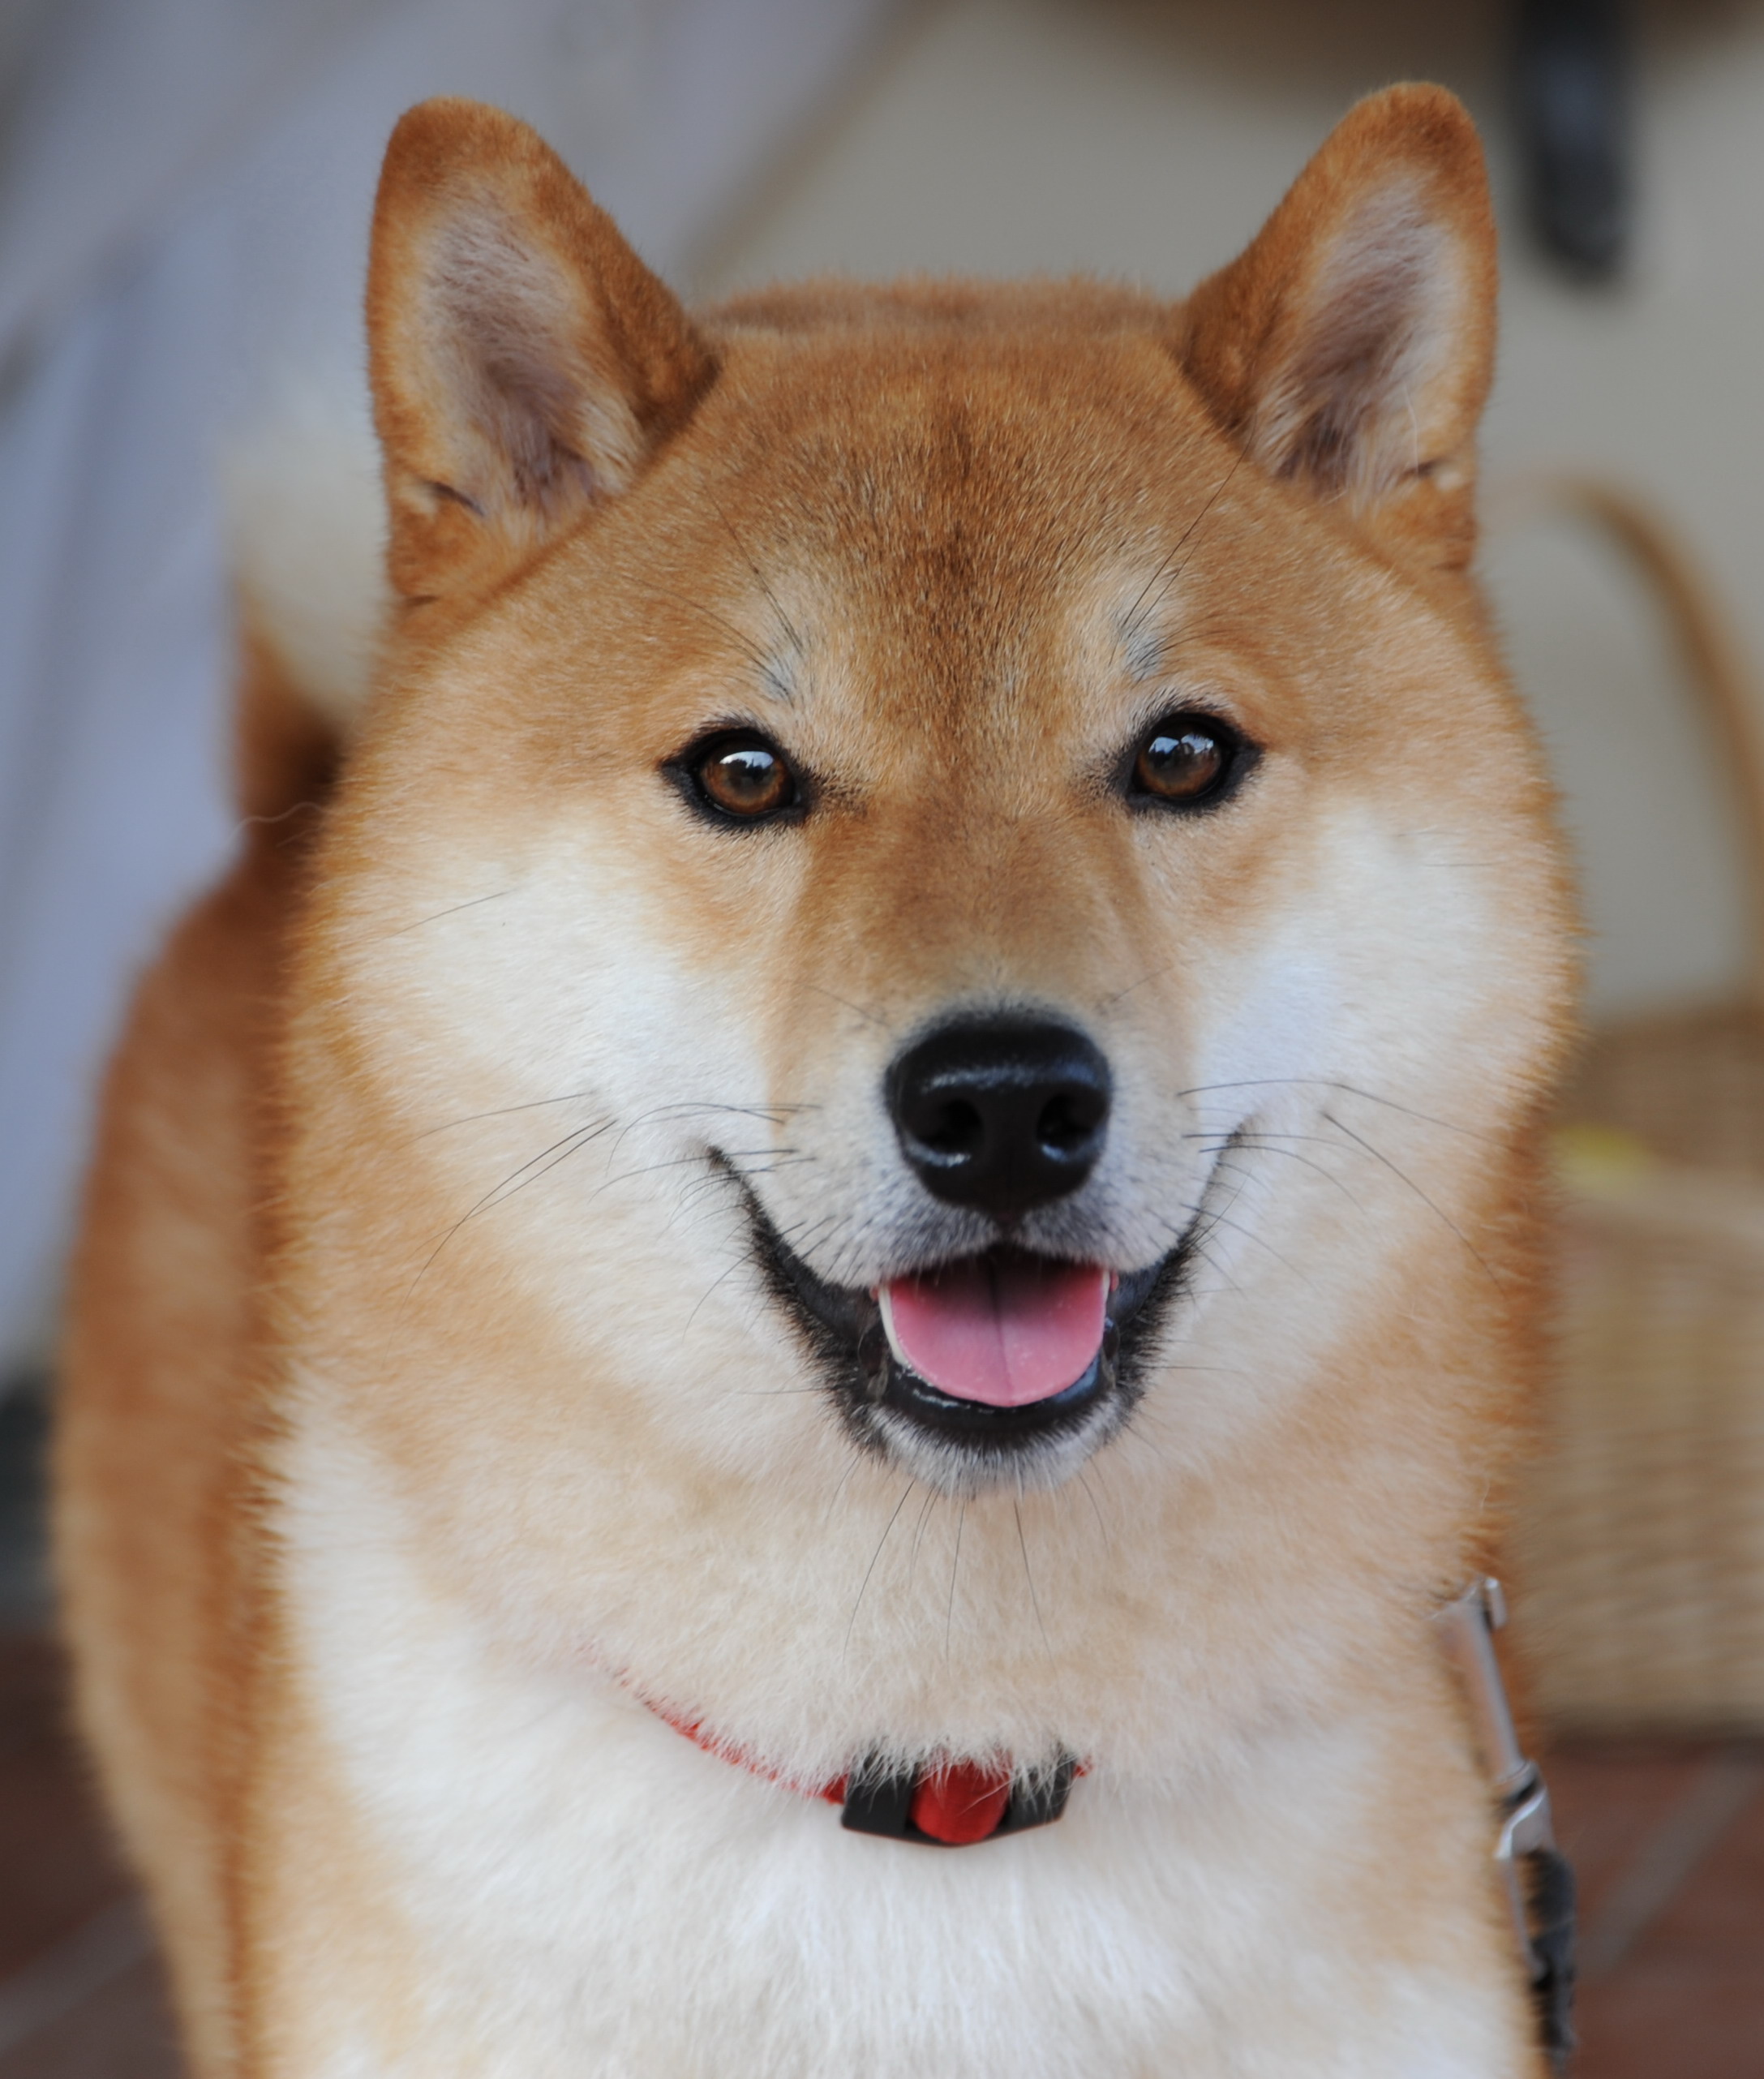 An image of the Shiba Inu breed of dog. The Shiba Inu is a large dog that has yellow-brownish and white fur.